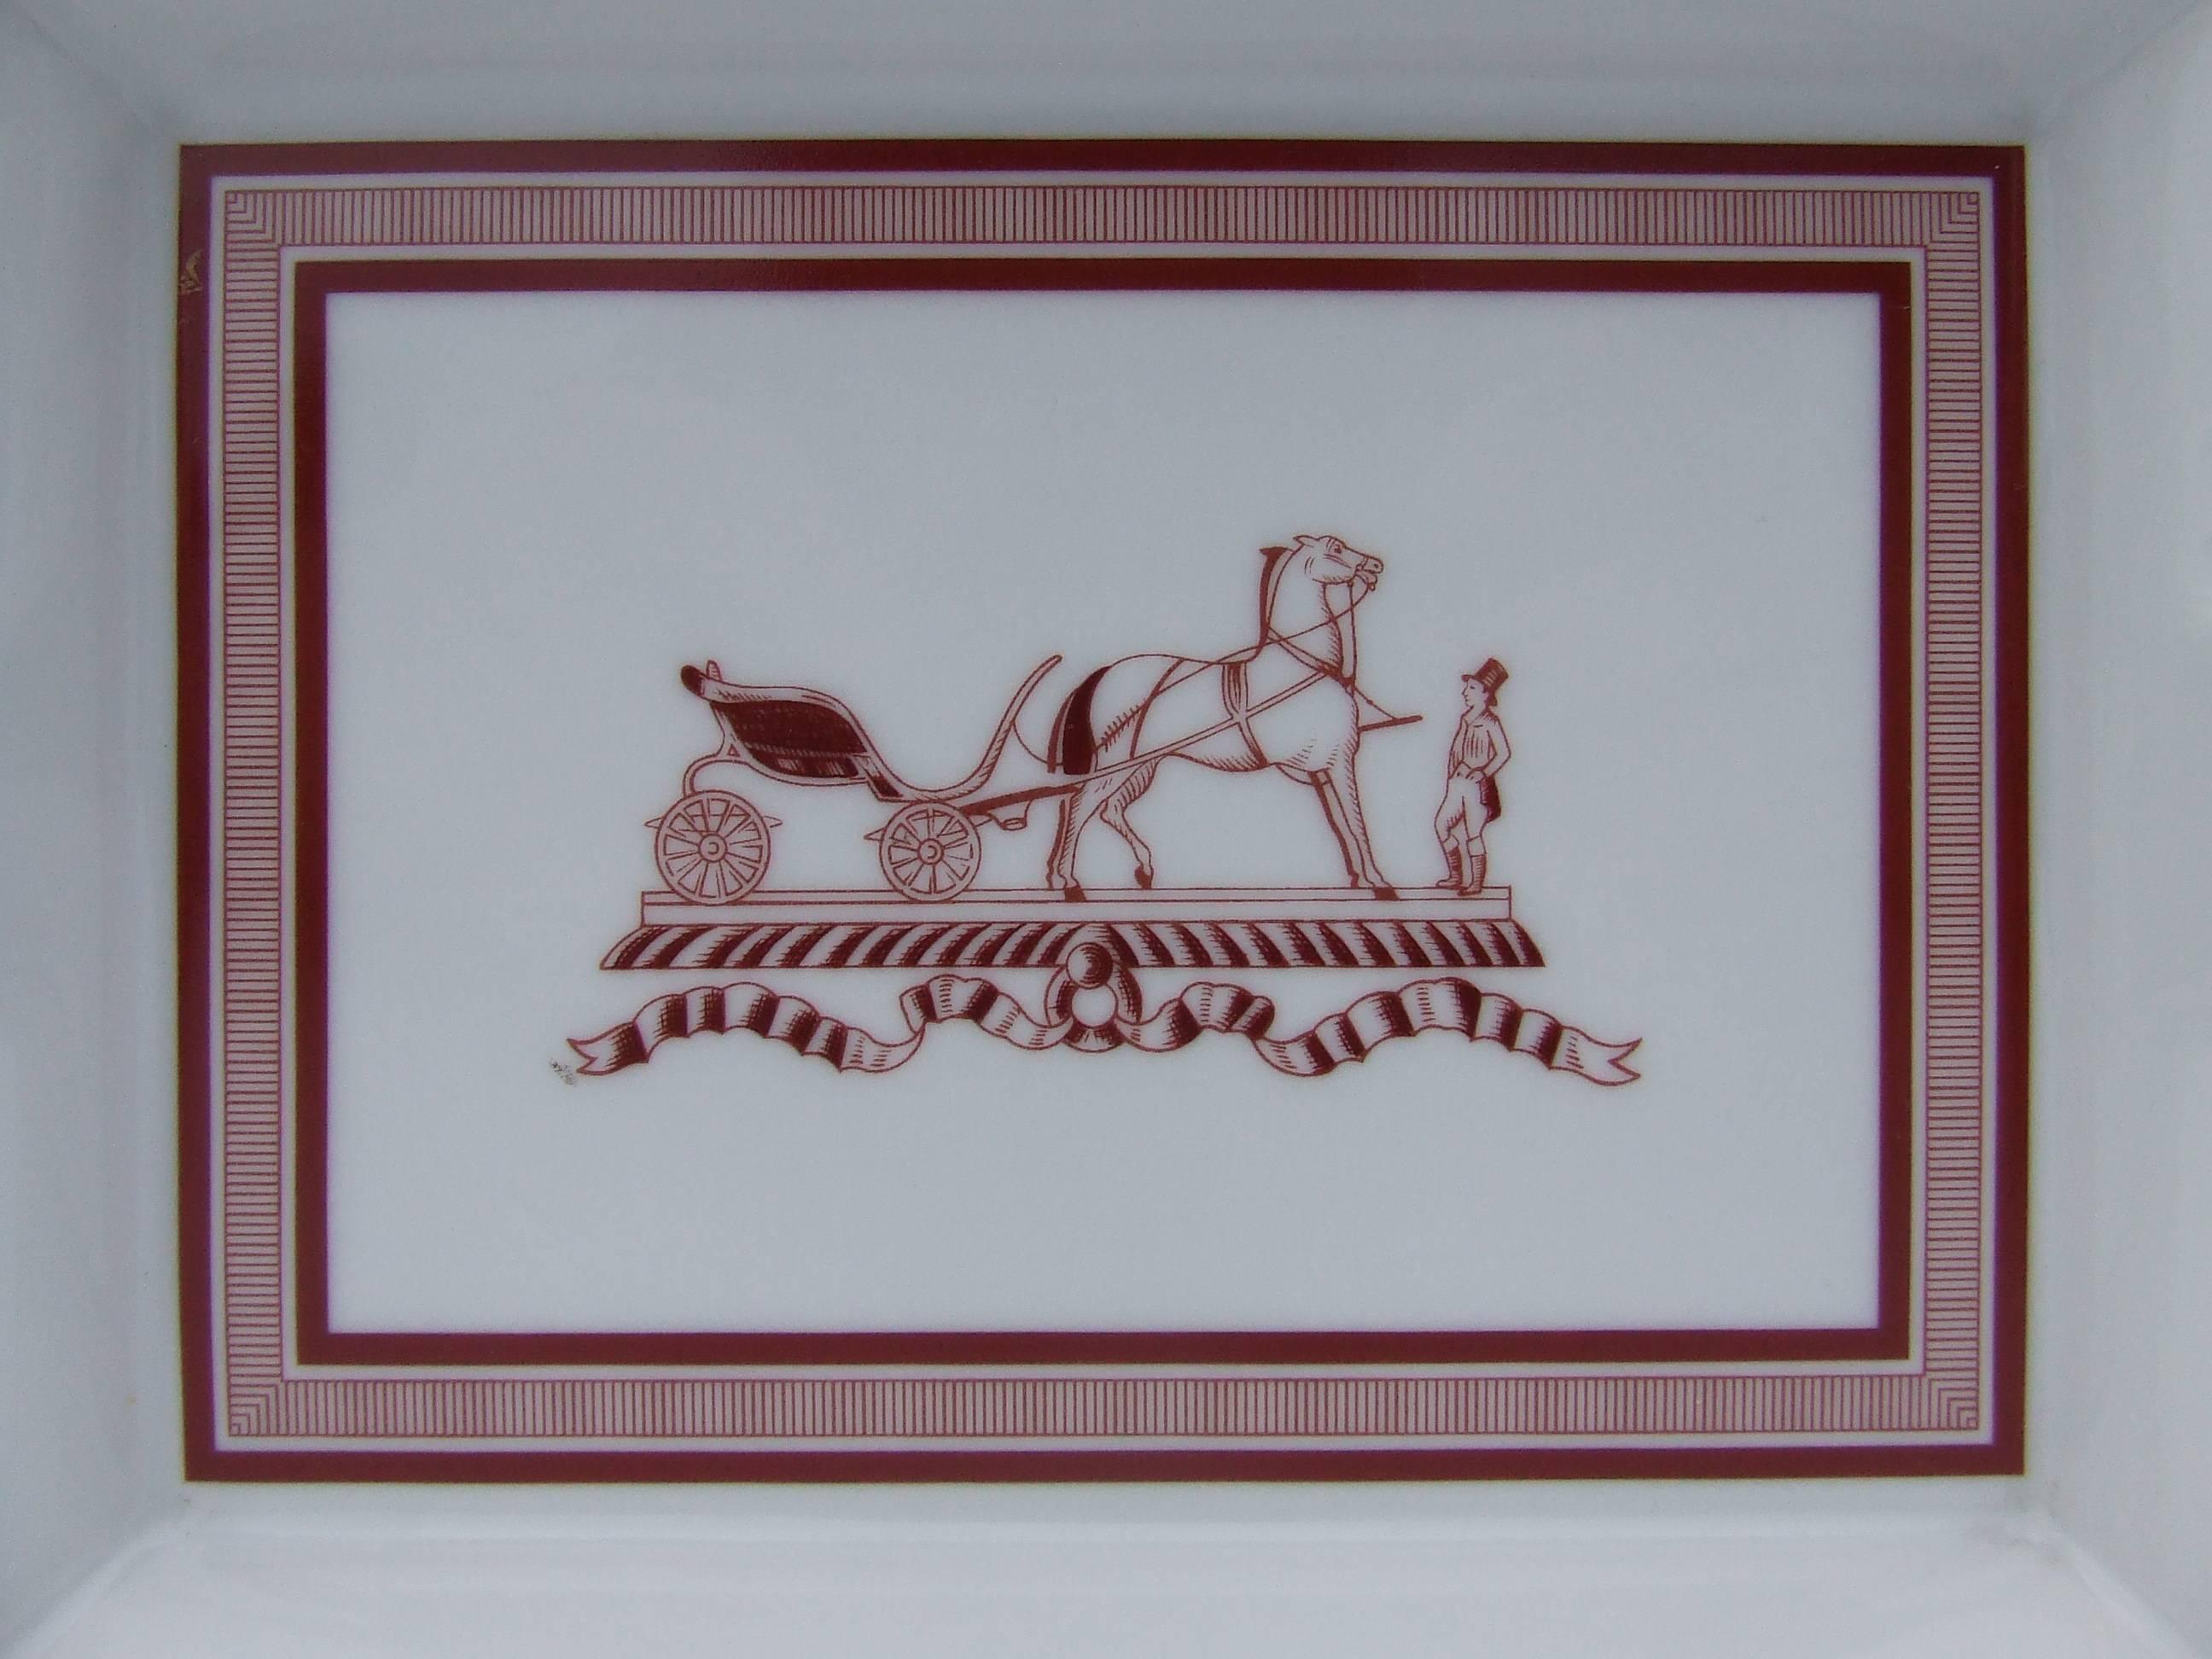 Beautiful Authentic Hermes Ashtray

Pattern: Hermès Traditional Logo of Carriage Horse and Coachman

Made in France

Made of Printed Limoges Porcelain

Colorways: White Background, Dark Red / Burgundy Drawings, Golden Edges

The bottom is covered